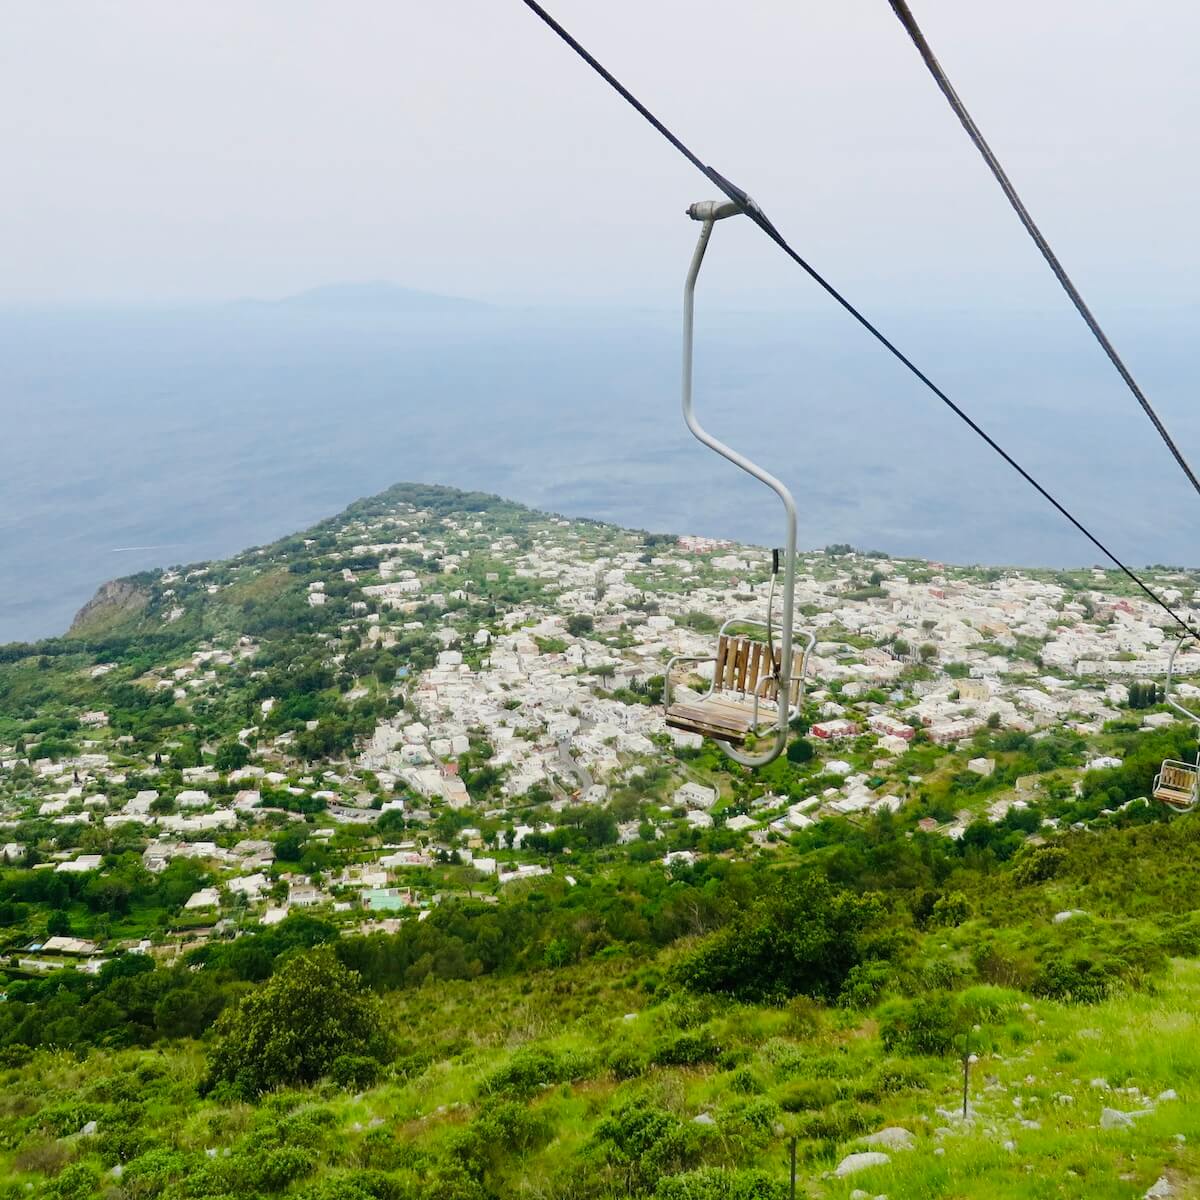 Chairlift to mt solaro